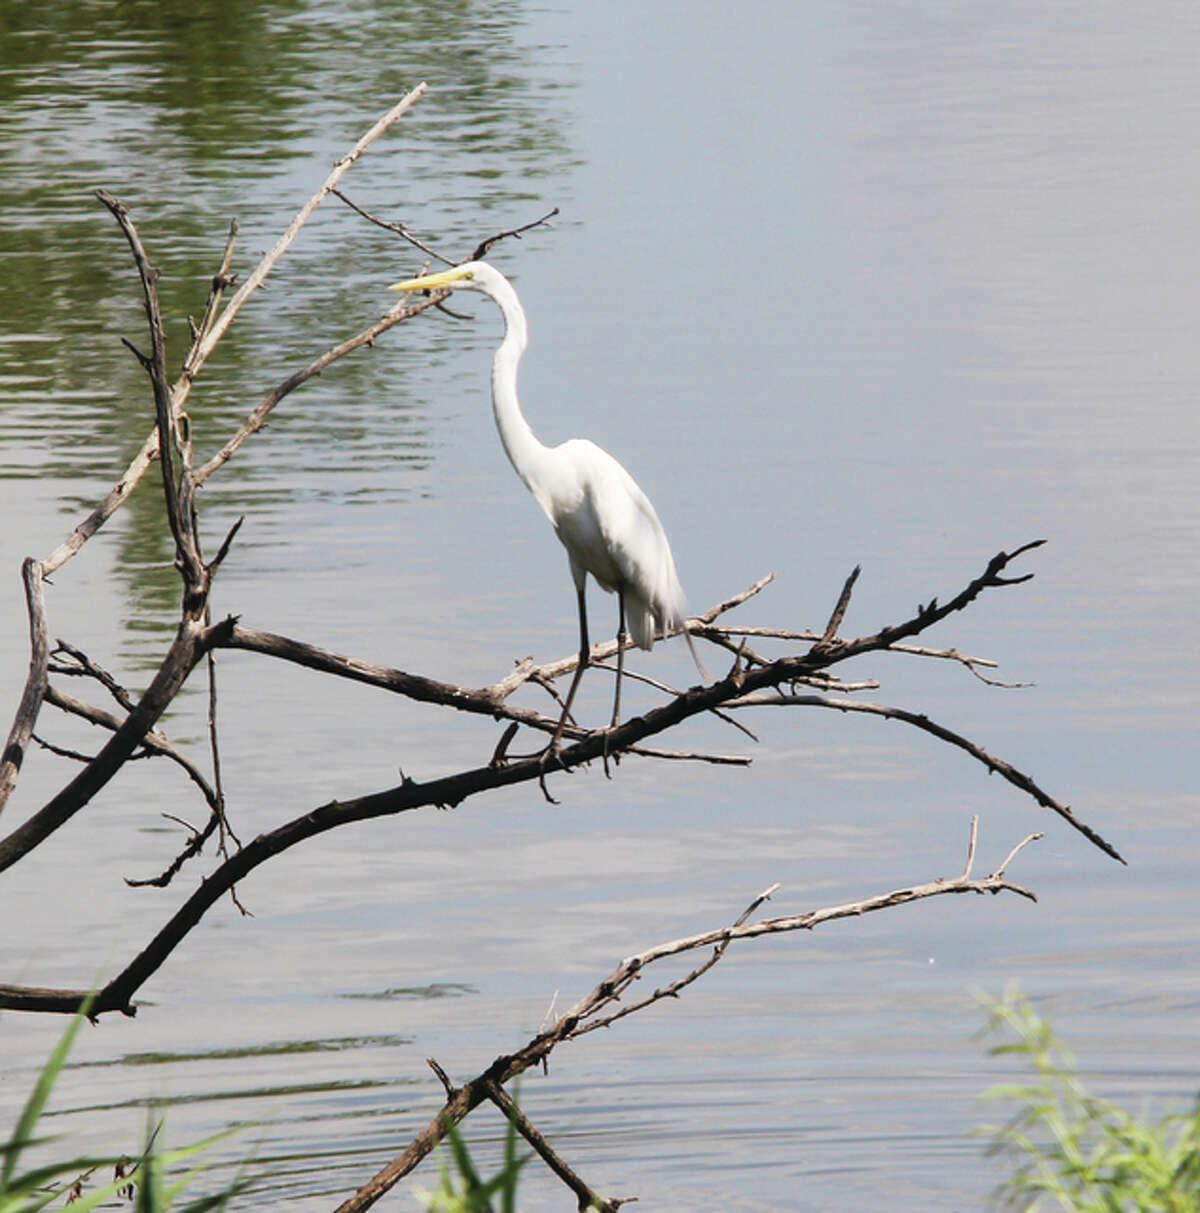 Scott Cousins/The Telegraph An egret perches on a dead limb in standing water along the Berm Highway Tuesday morning while more egrets perch on nearby trees. High water along the river has made it a likely place to spot various waterfowl and other birds in recent weeks.